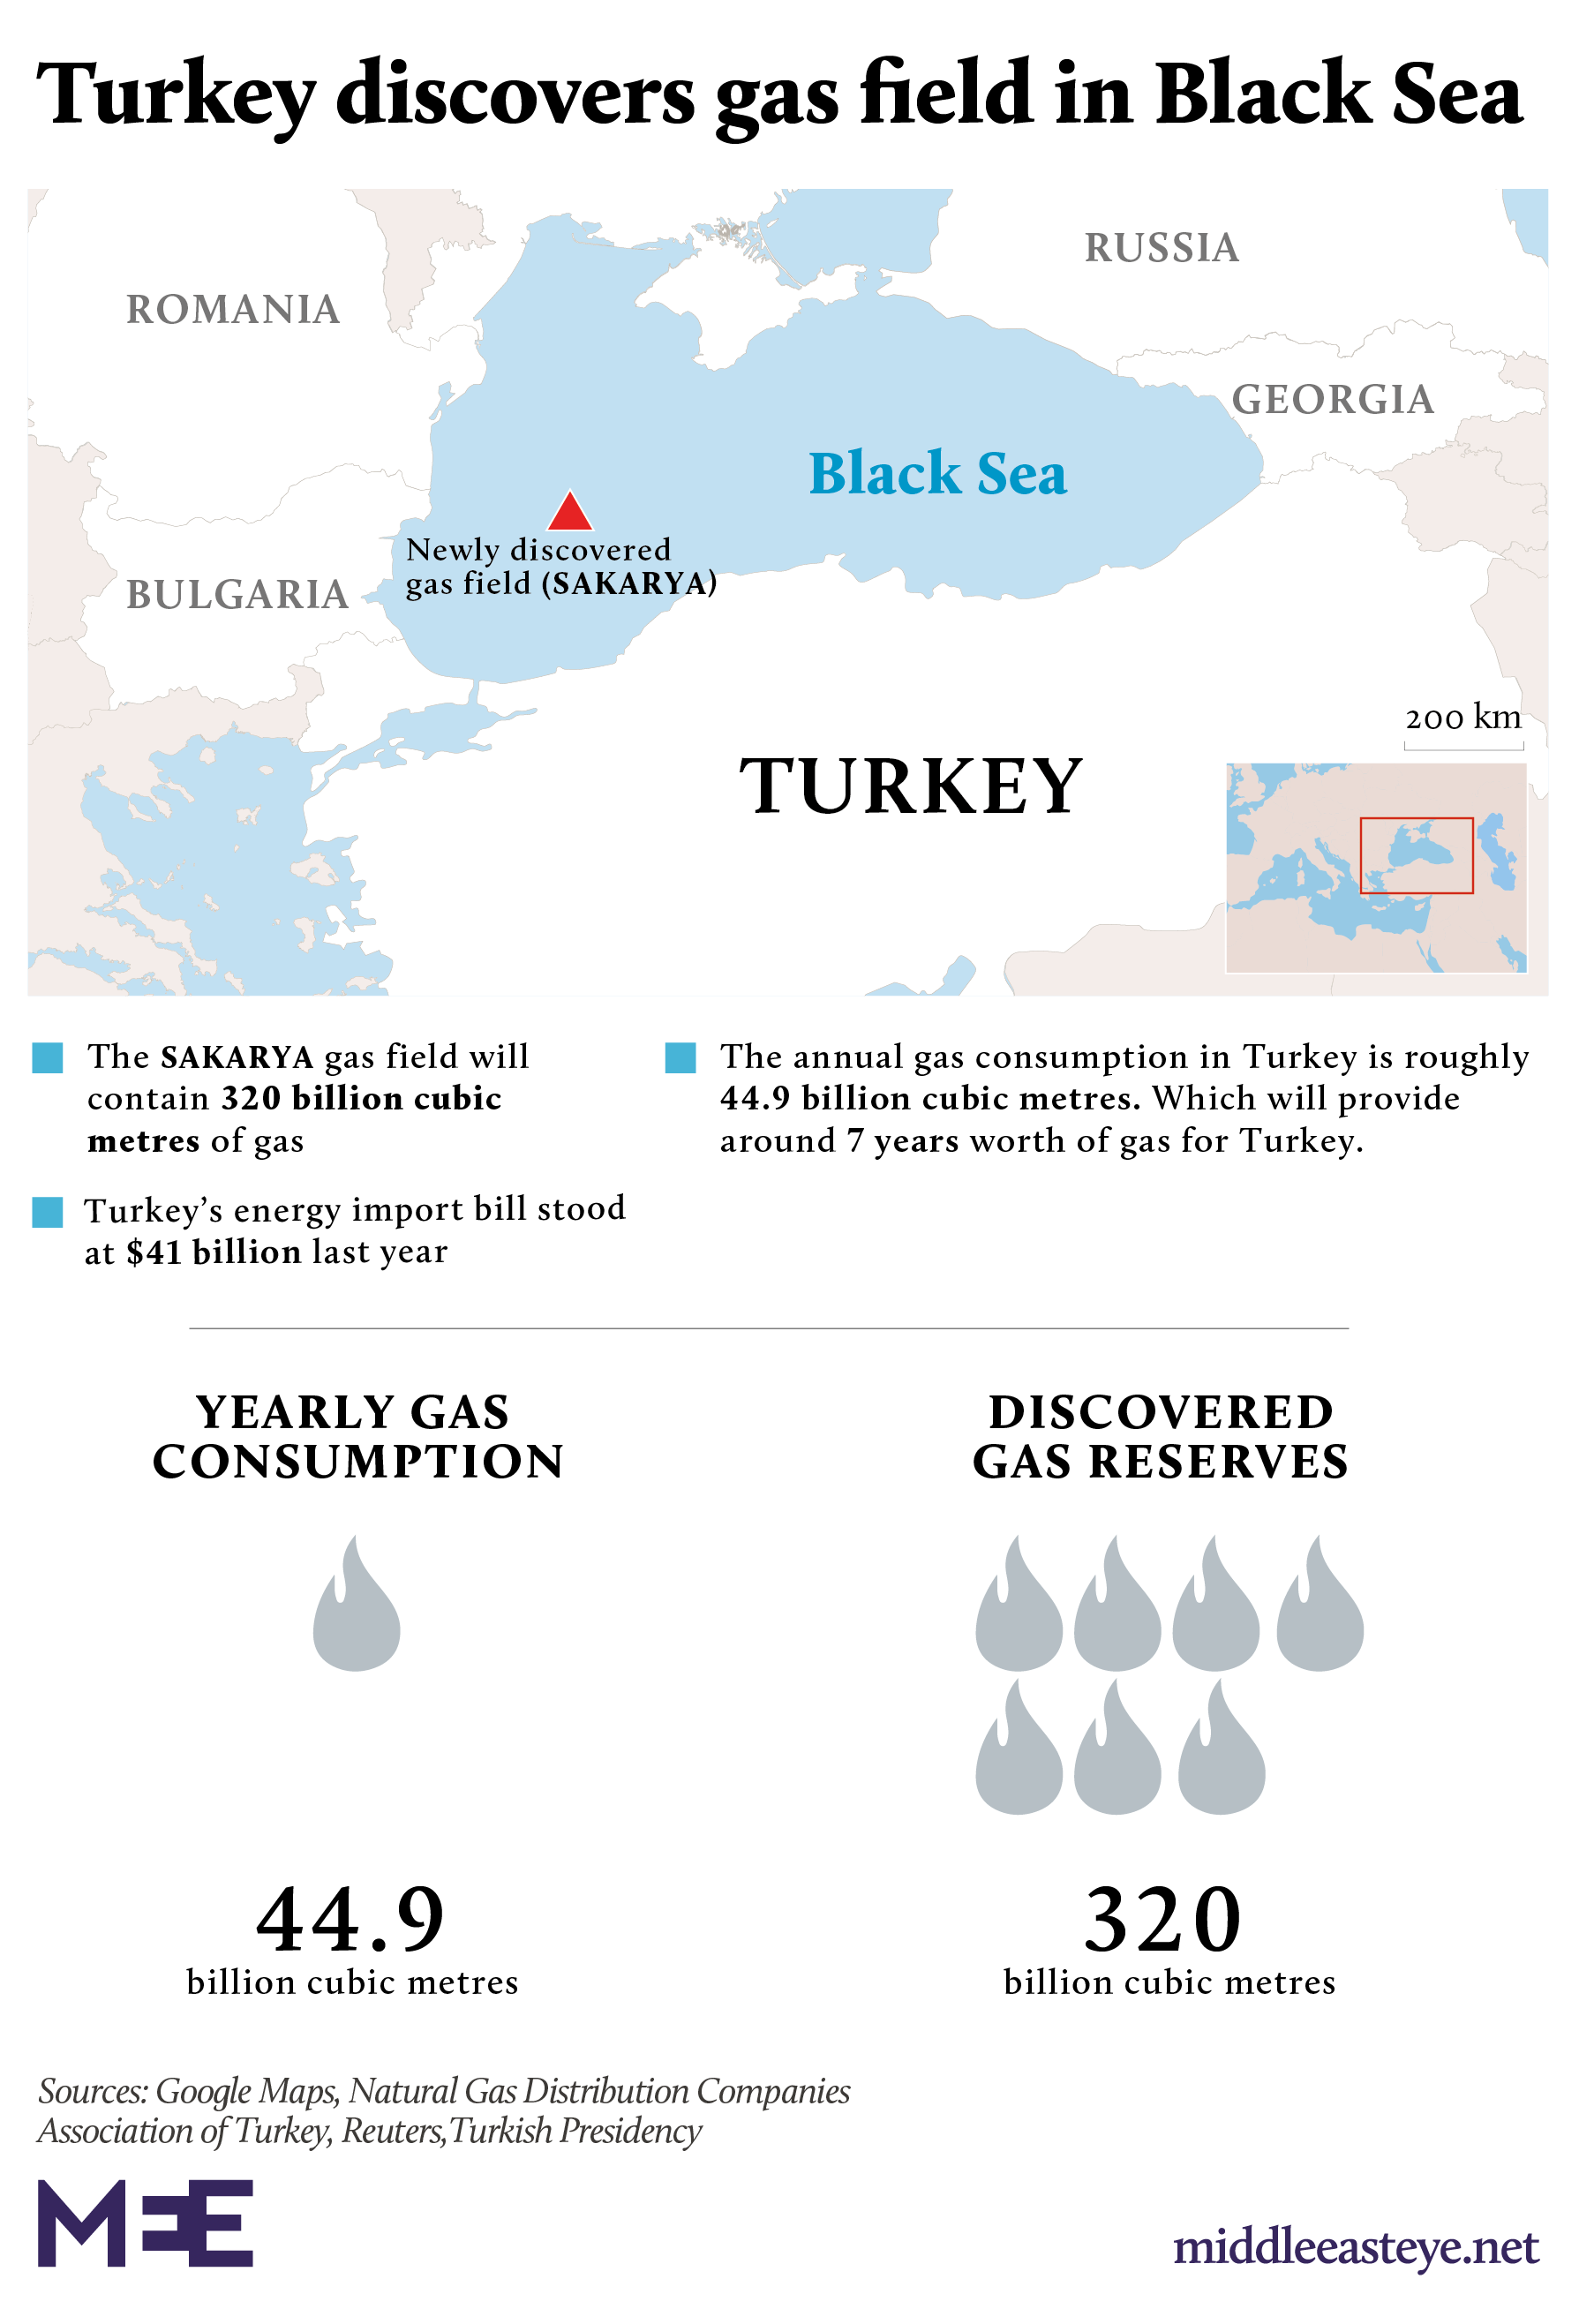 Turkey announced natural gas discovery in Black Sea, the largest in its history